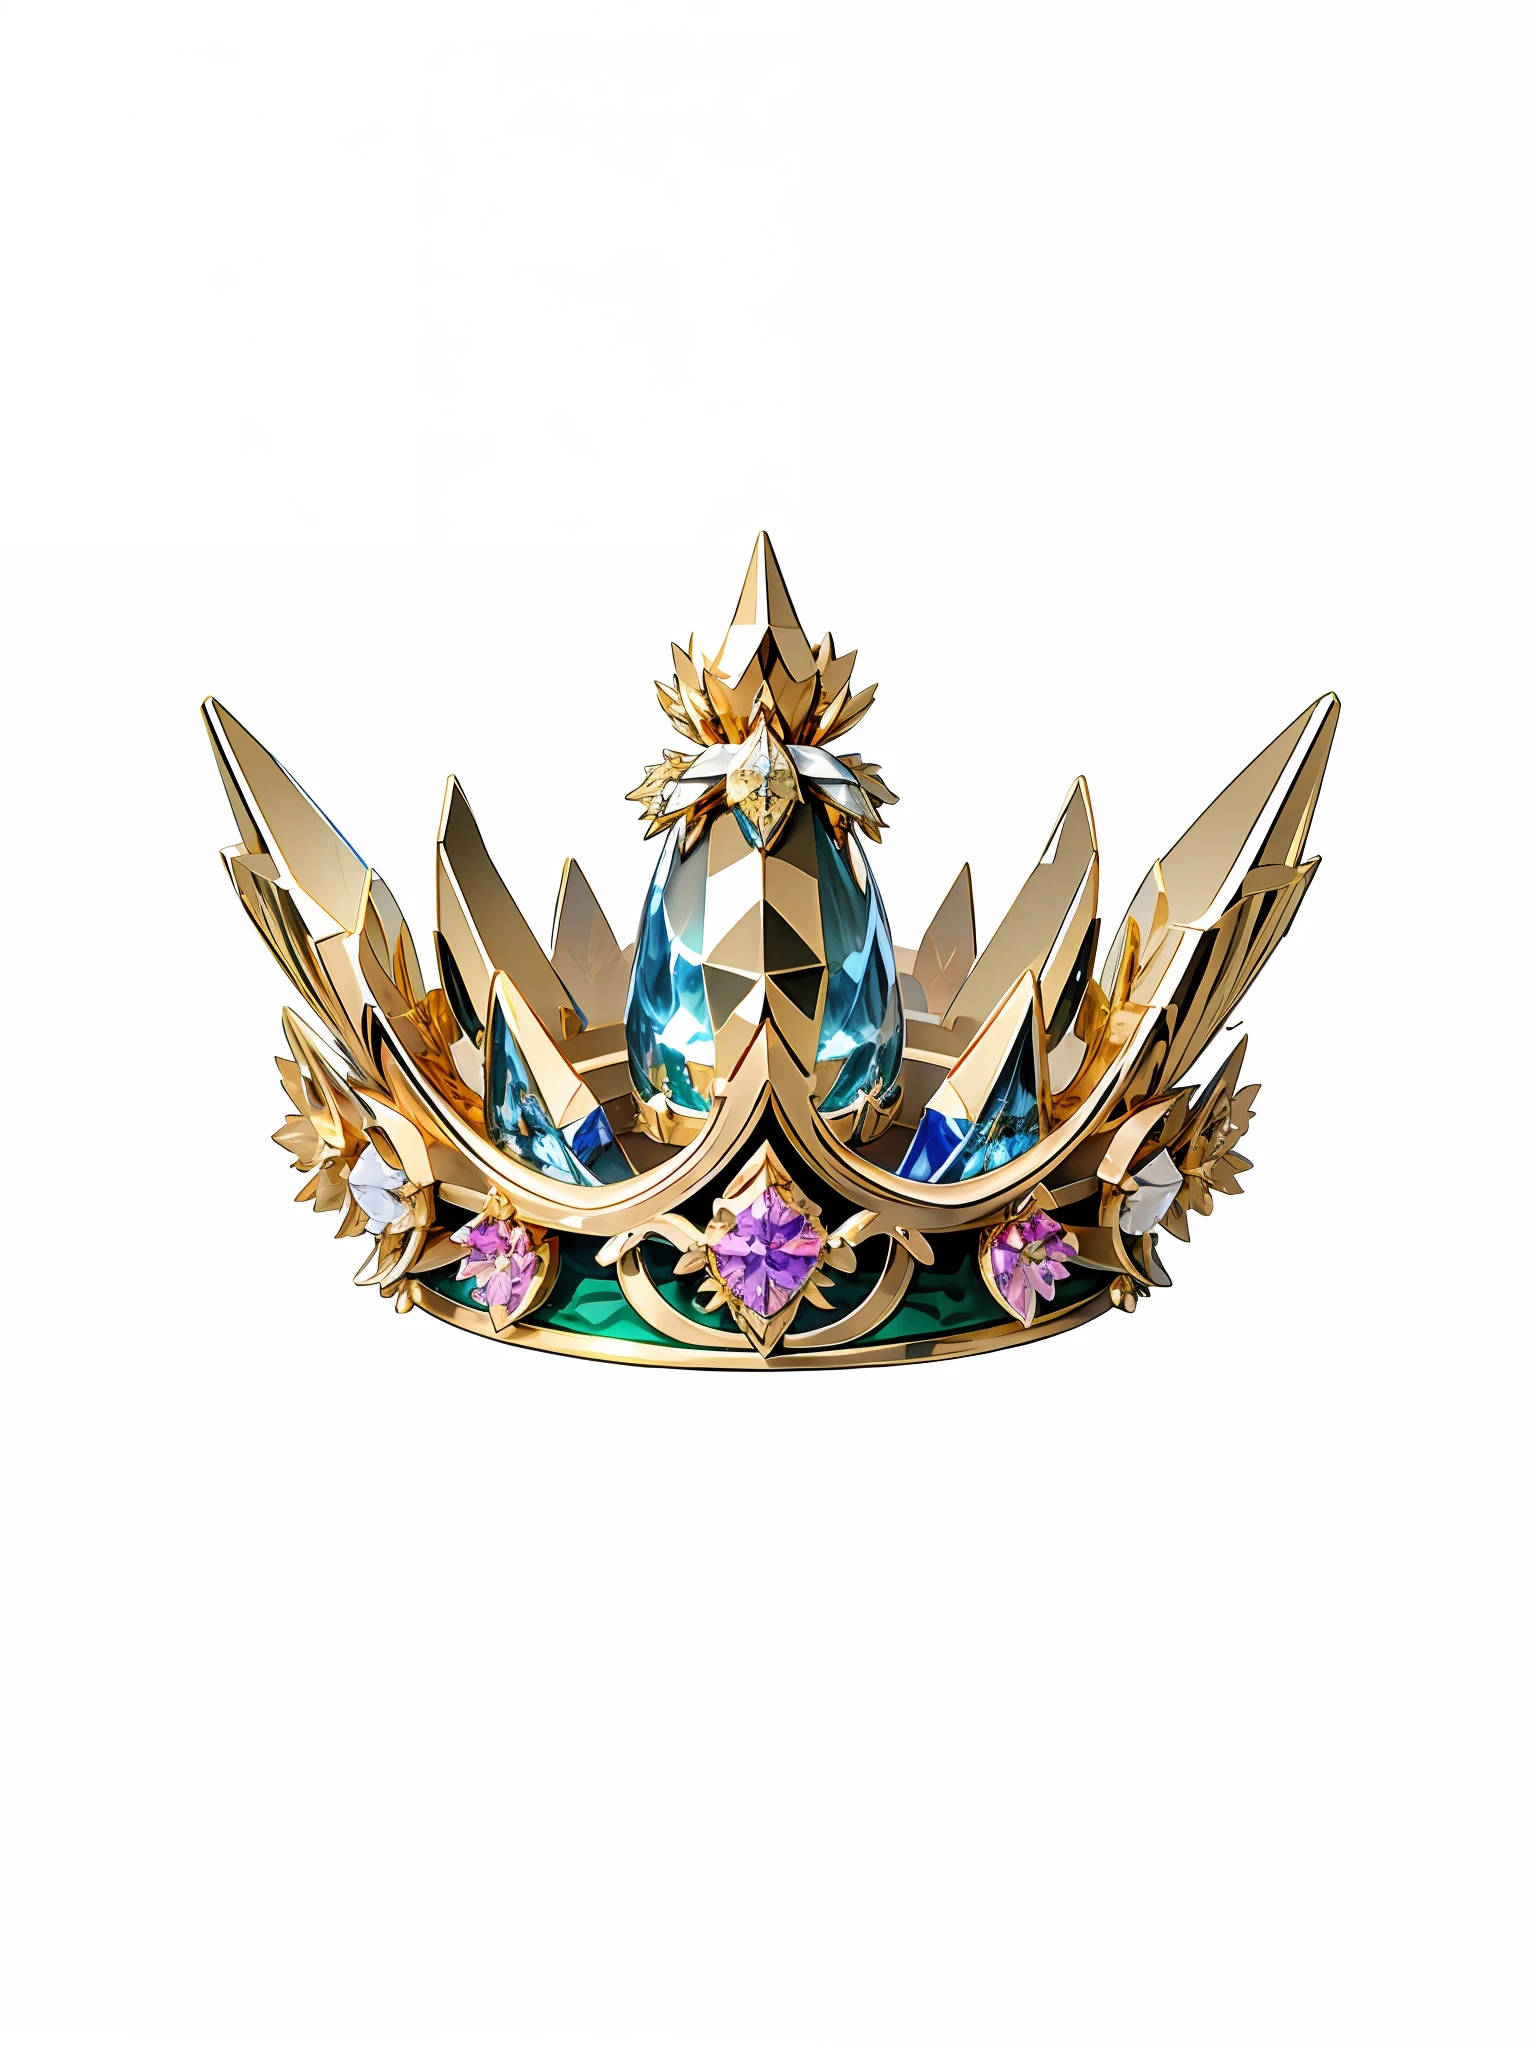 8k, (crown close-up), (((looking up))), with a gothic crown on white background, set with precious stones, gothic metal decoration, gold wings!! ,((((Elf Crown)))),(Game Crown)))),((Gold Crown)),((Left and Right Symmetrical Crown)),(Streamlined Crown)))),(Slender Crown)))), Gorgeous, Colorful, Intricate Metal Decoration, Ultra Realistic Fantasy Crown, White Laser Crown, Gold Wing Crown, Floating Crown, (Ray Tracing), ((Clean Background)), Crown, Crown, Giant Gold Crown, Jewel Tiara, Metal Crown --auto --s2